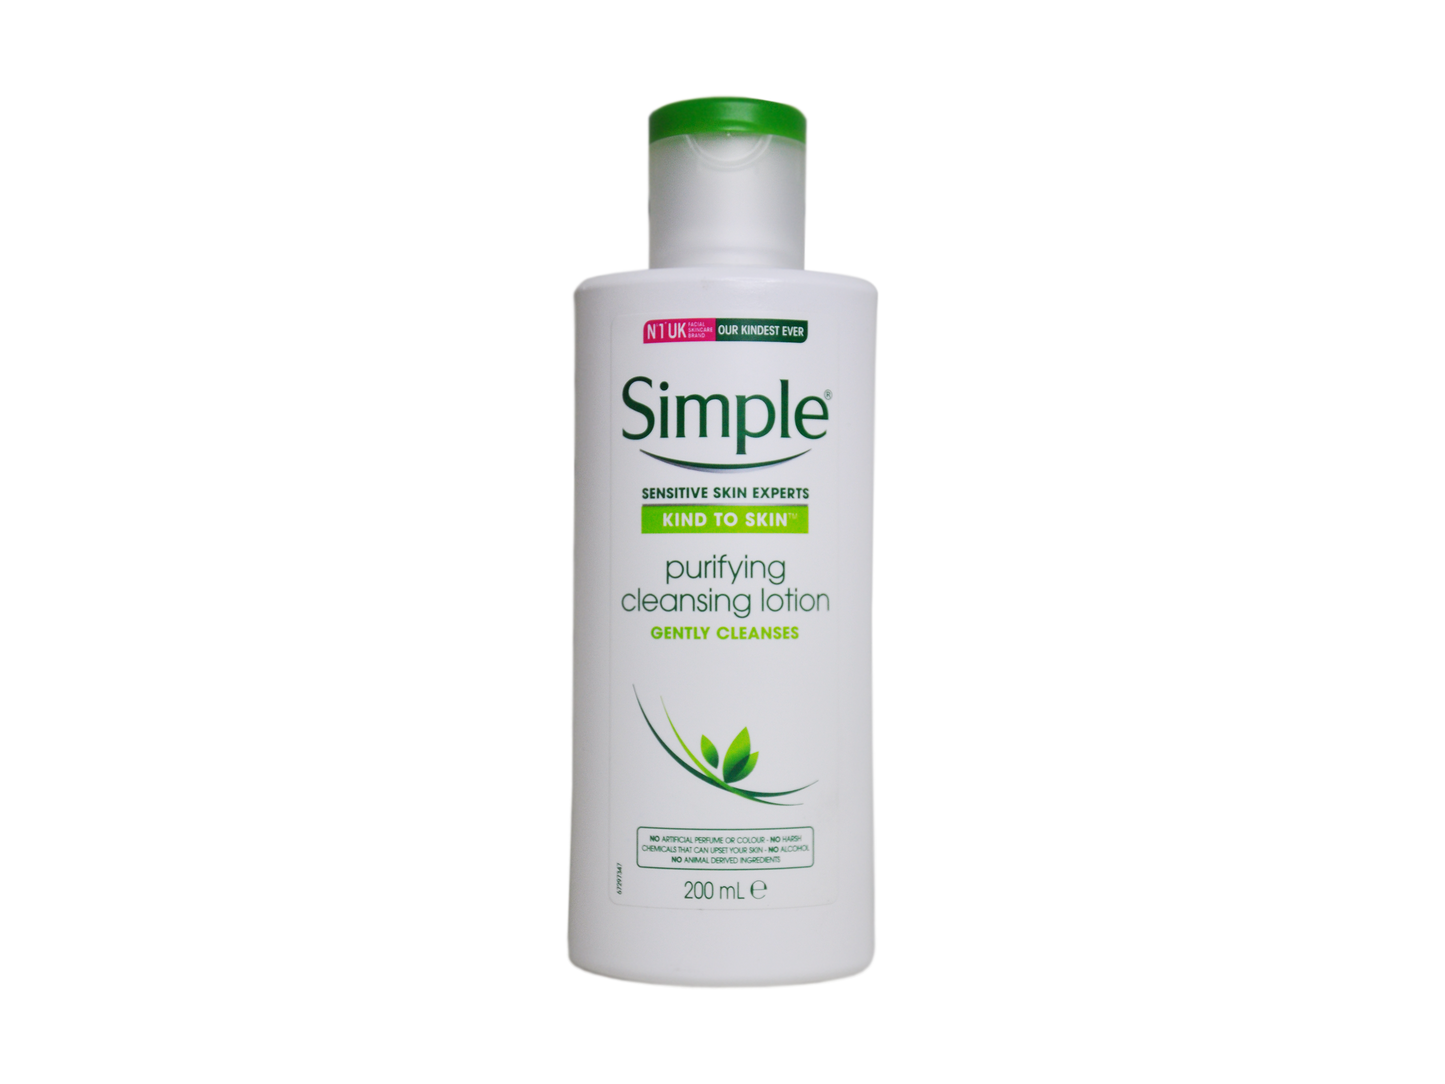 Simple, Purifying Cleansing Lotion